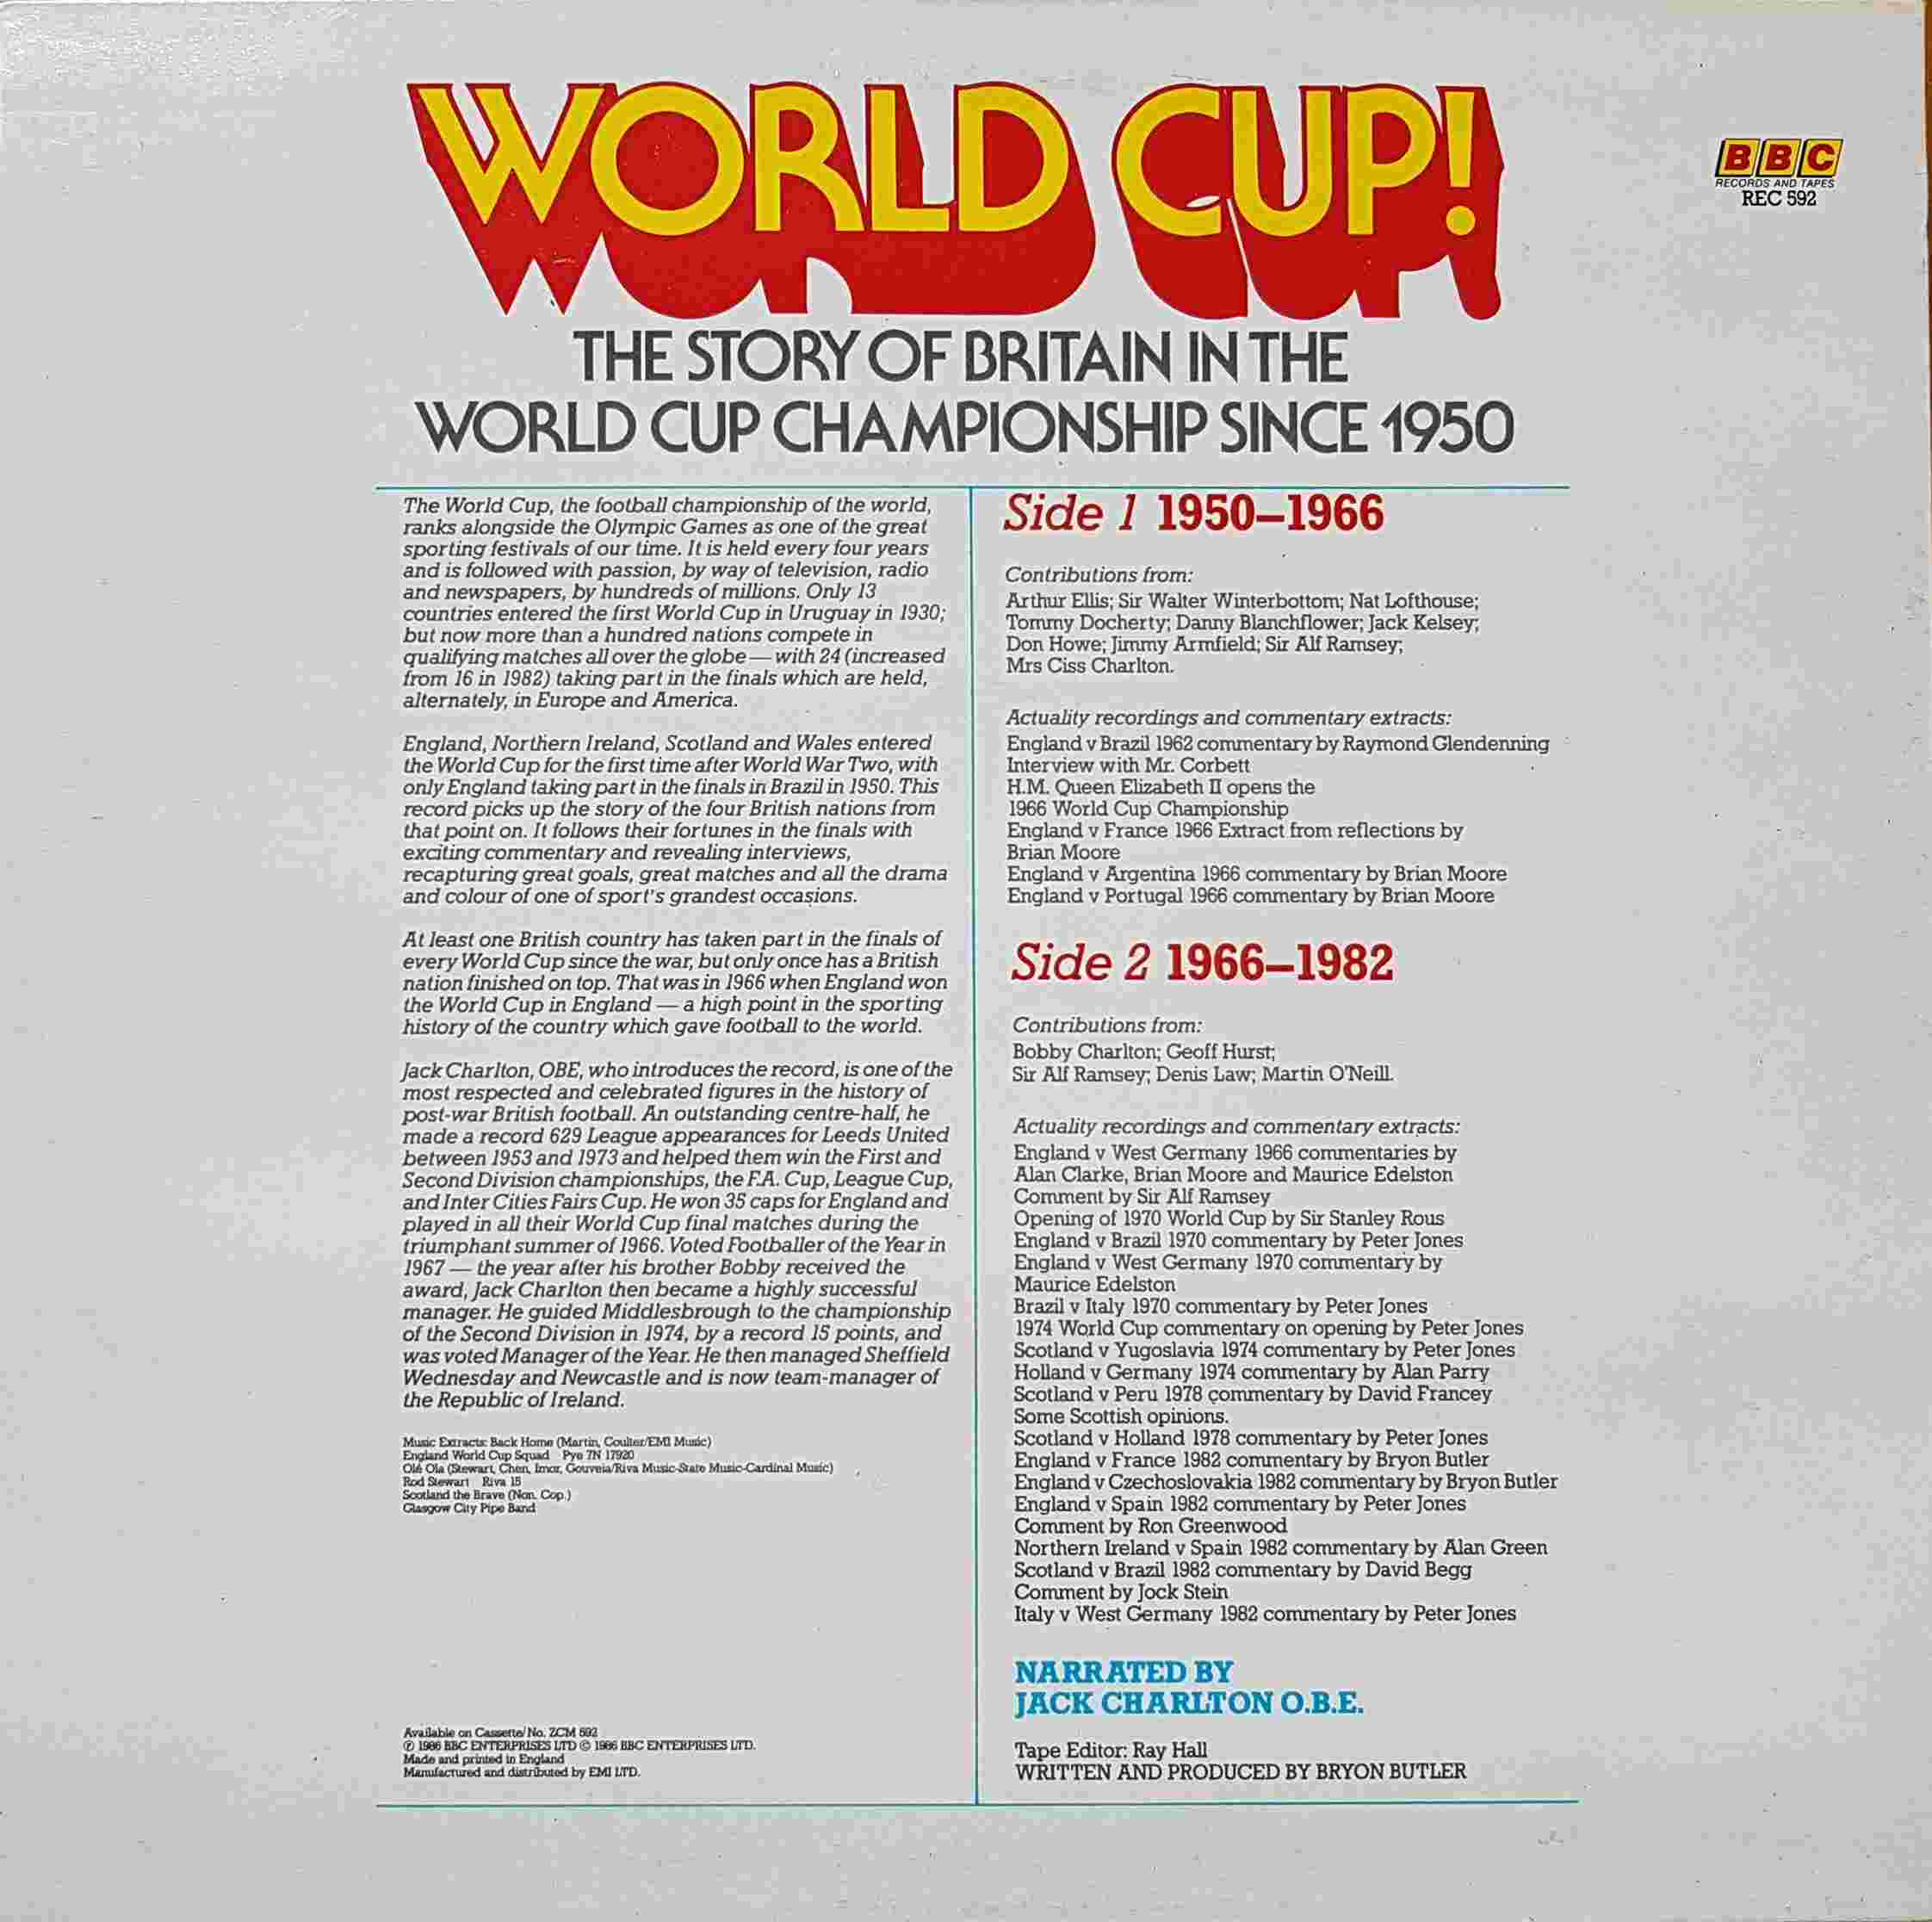 Picture of REC 592 World cup ! by artist Various from the BBC records and Tapes library